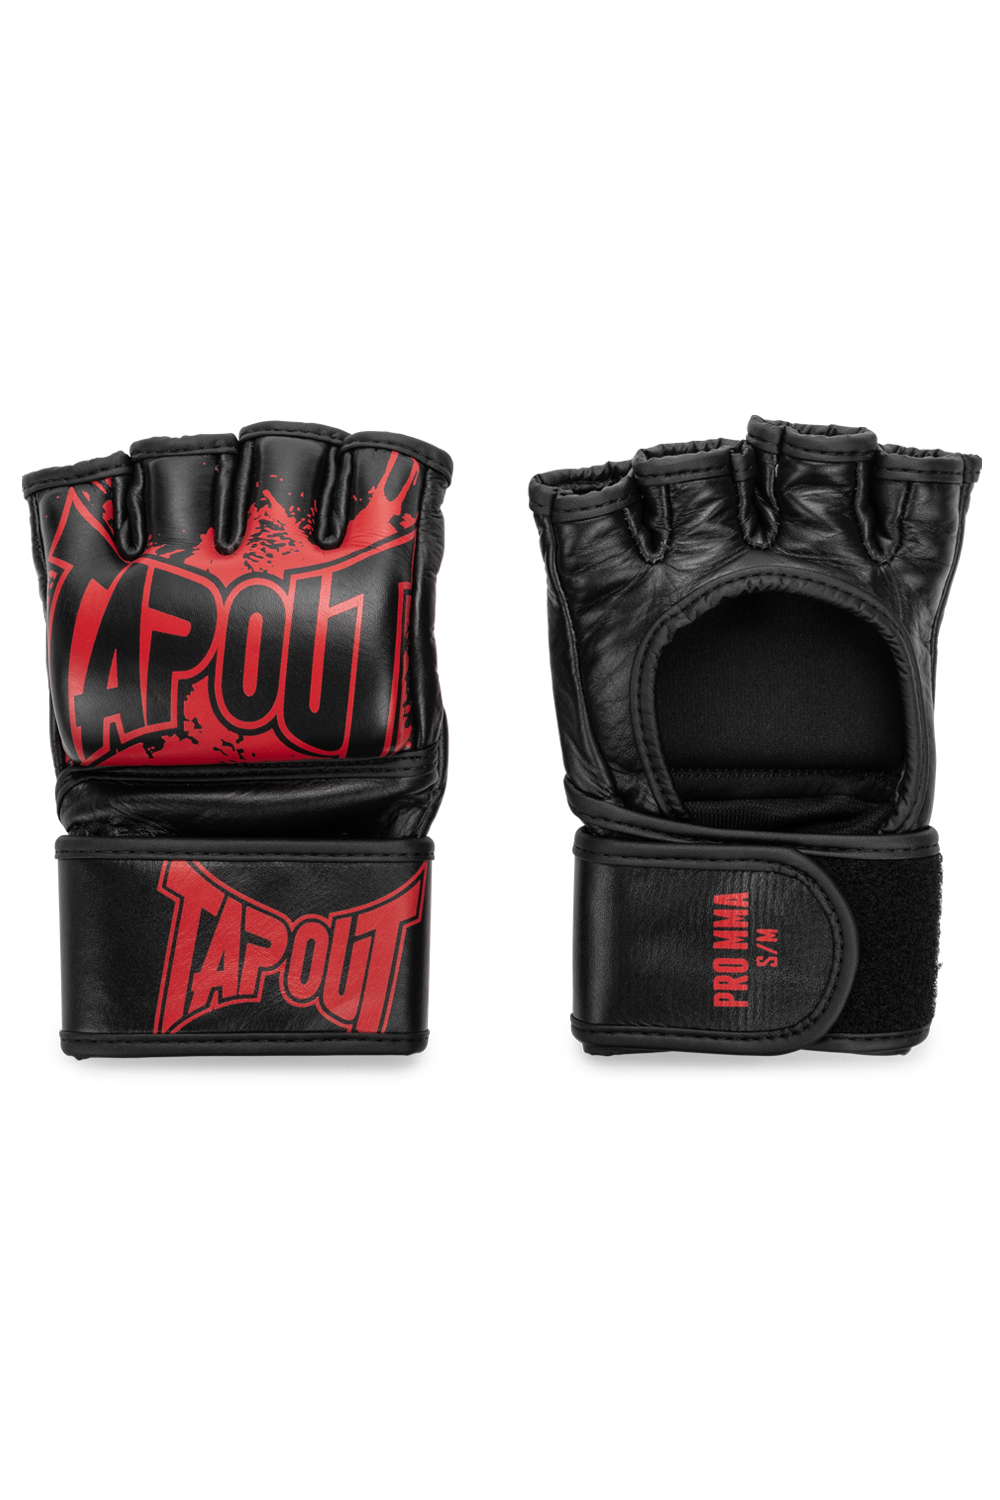 Tapout Leather MMA Pro Fight Gloves  (1 Pair)